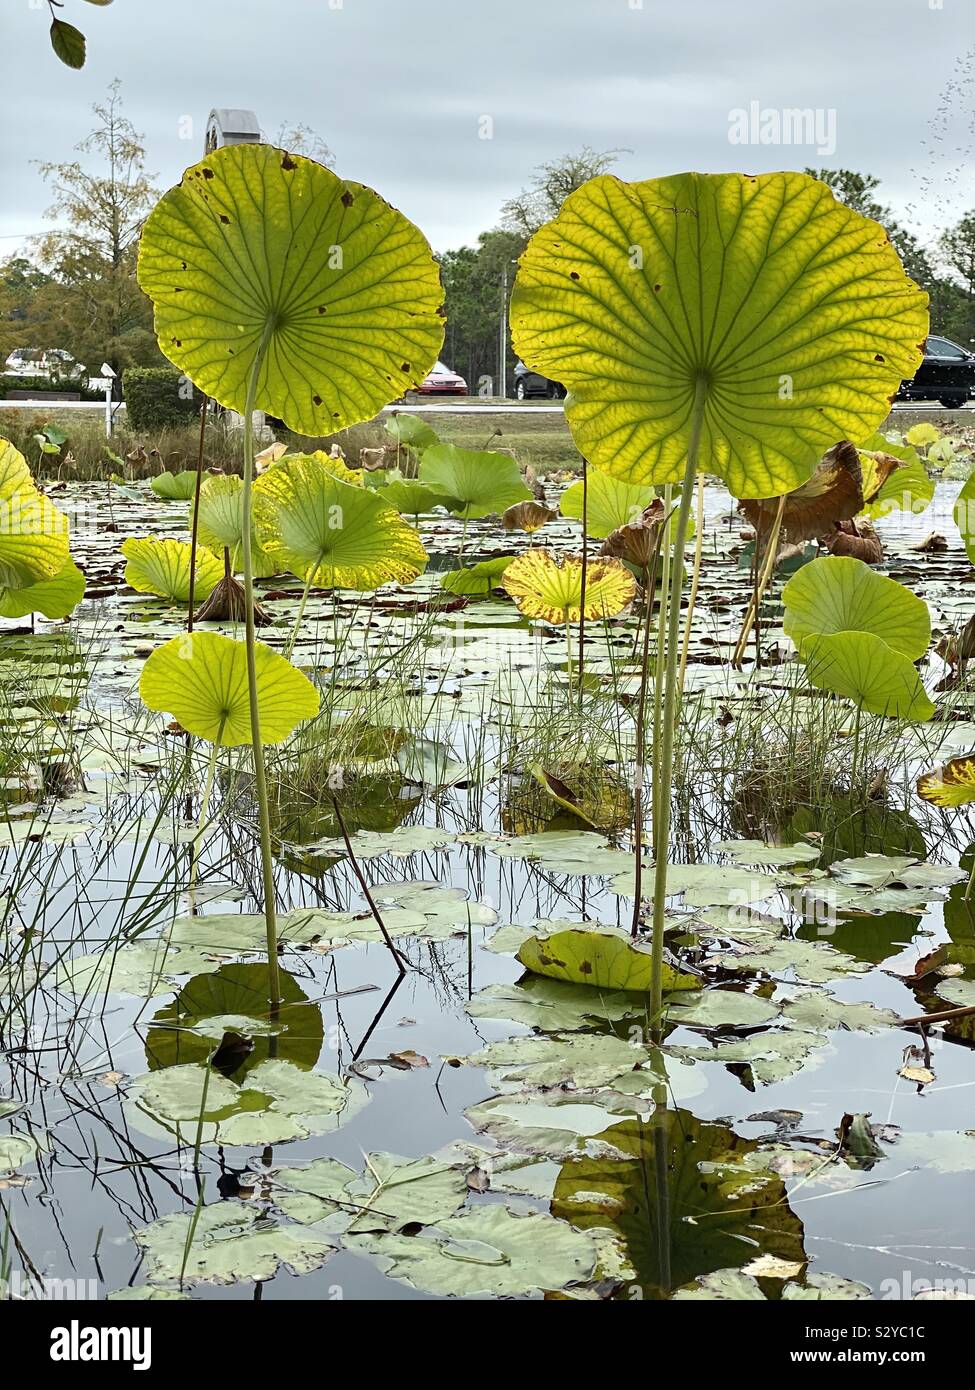 Lily pad pond with huge lily pads standing tall in the pond Stock Photo